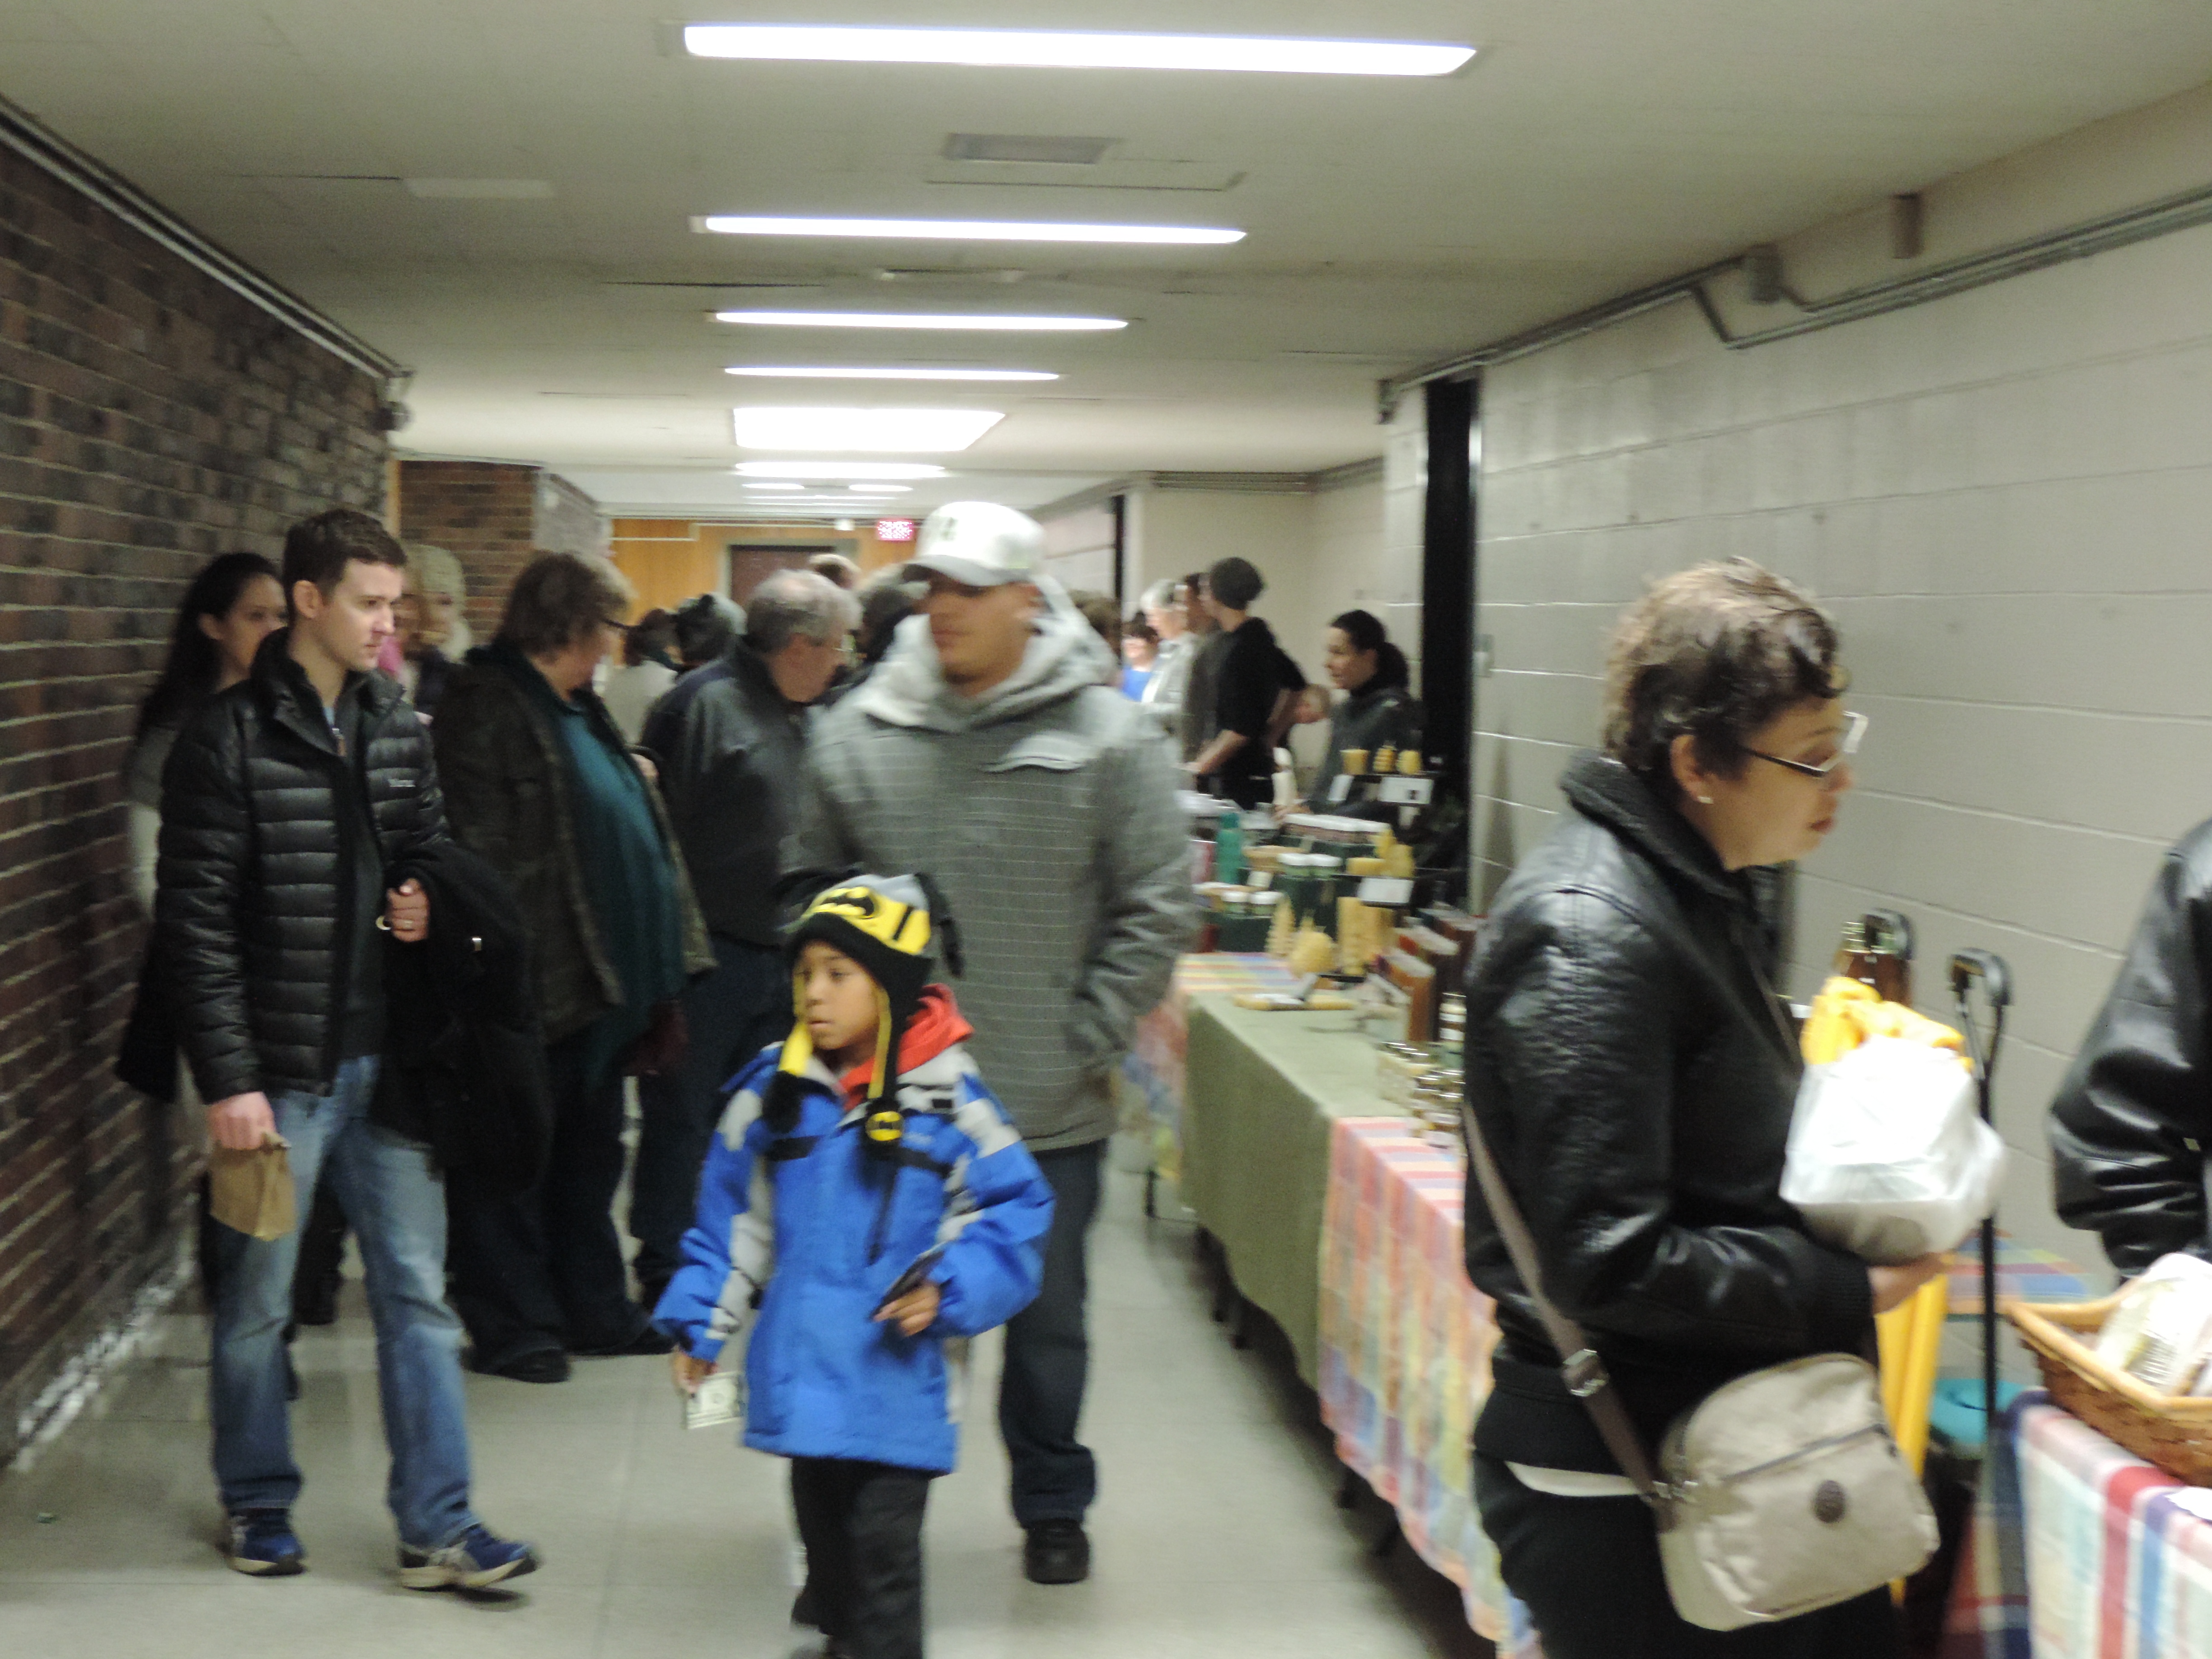 Elmwood Village Winter Market at Buffalo State continues on February 13